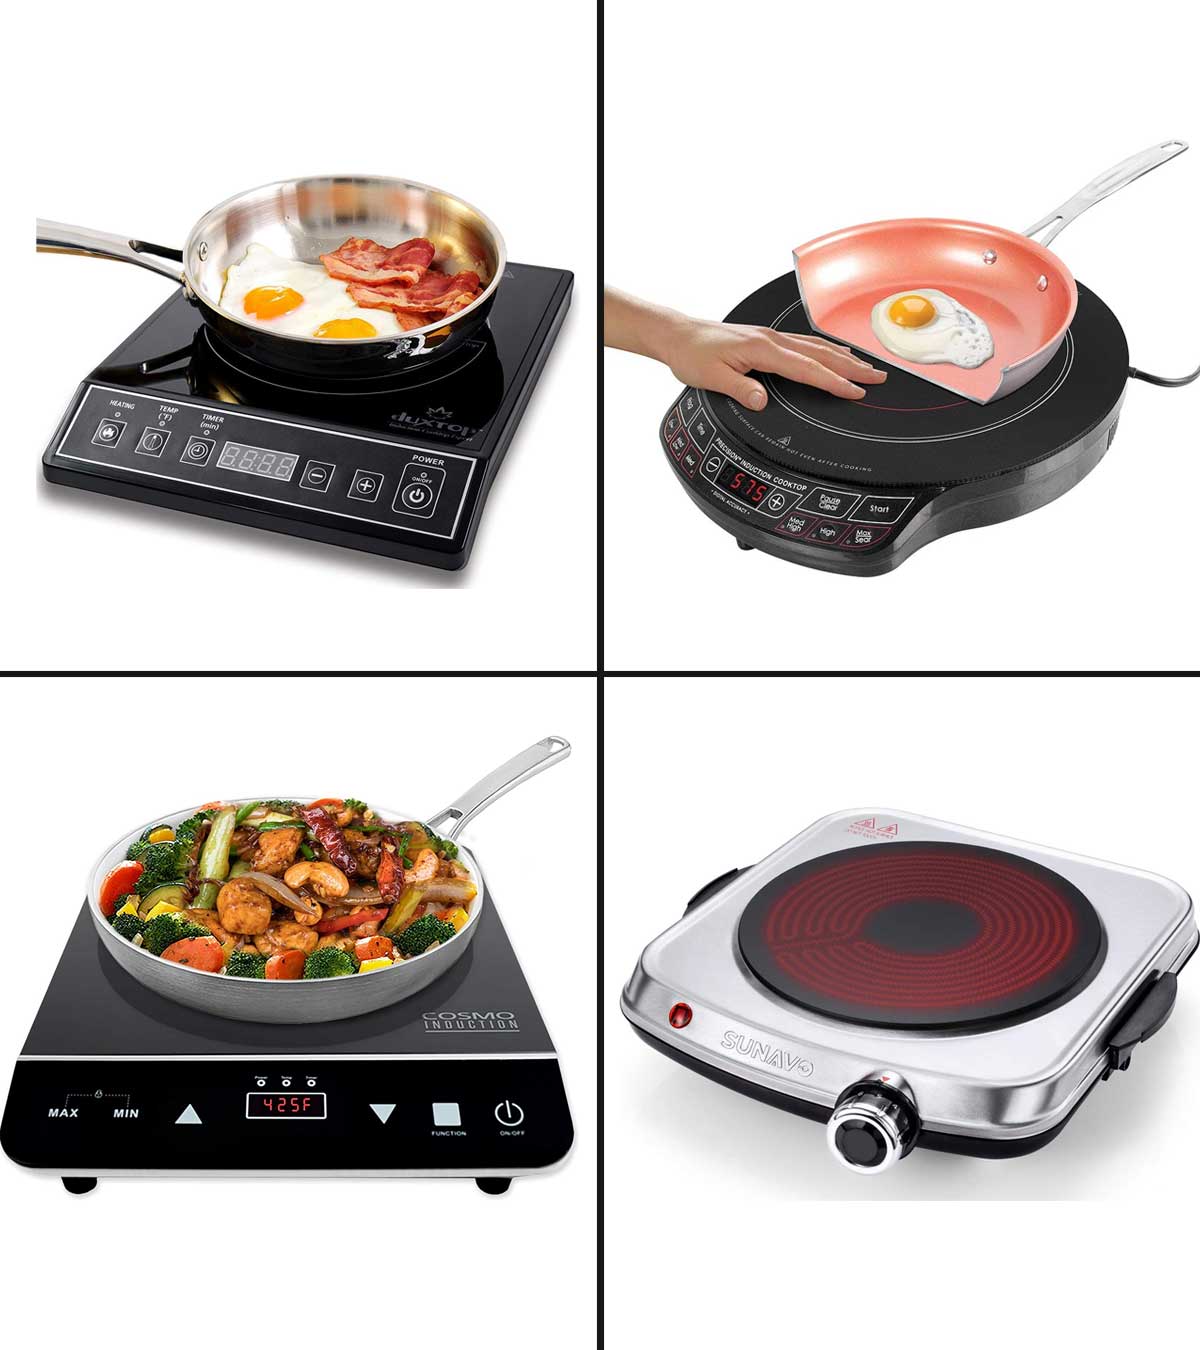 Induction vs. electric cooktops: Which is right for you in 2021